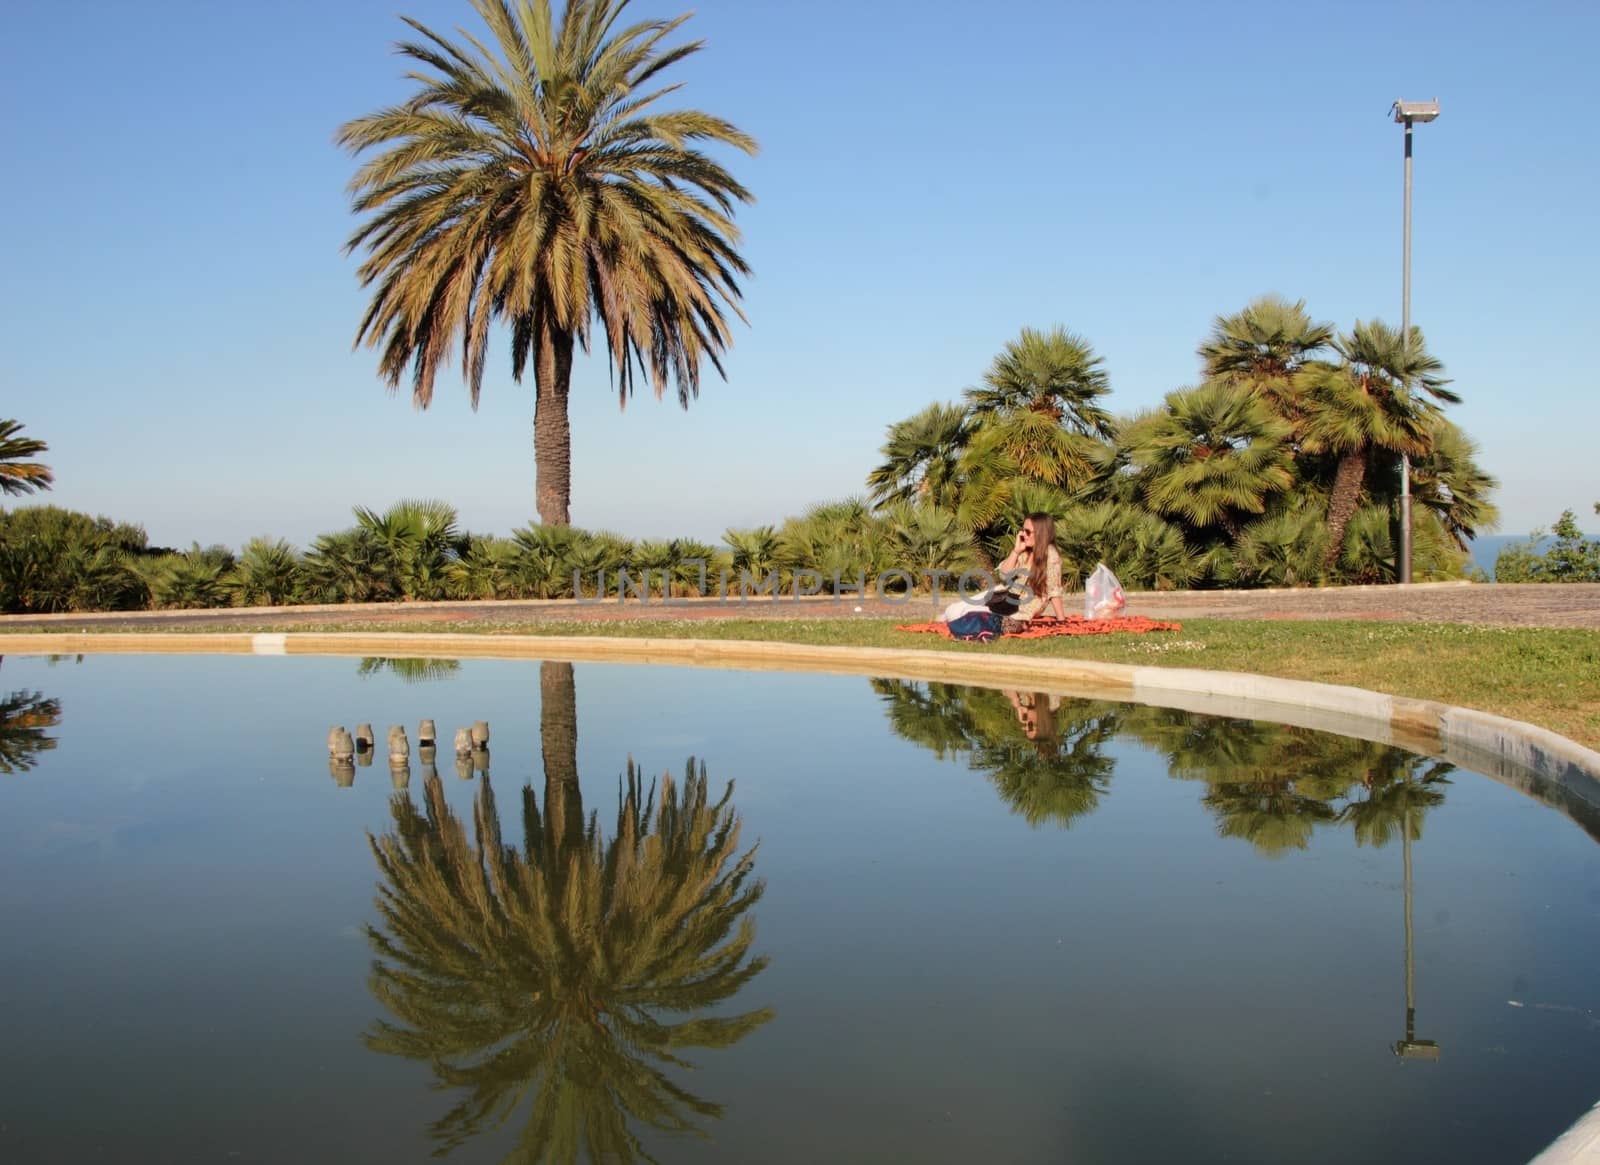 Palm tree reflected in the pond. The girl at the picnic on the phone.